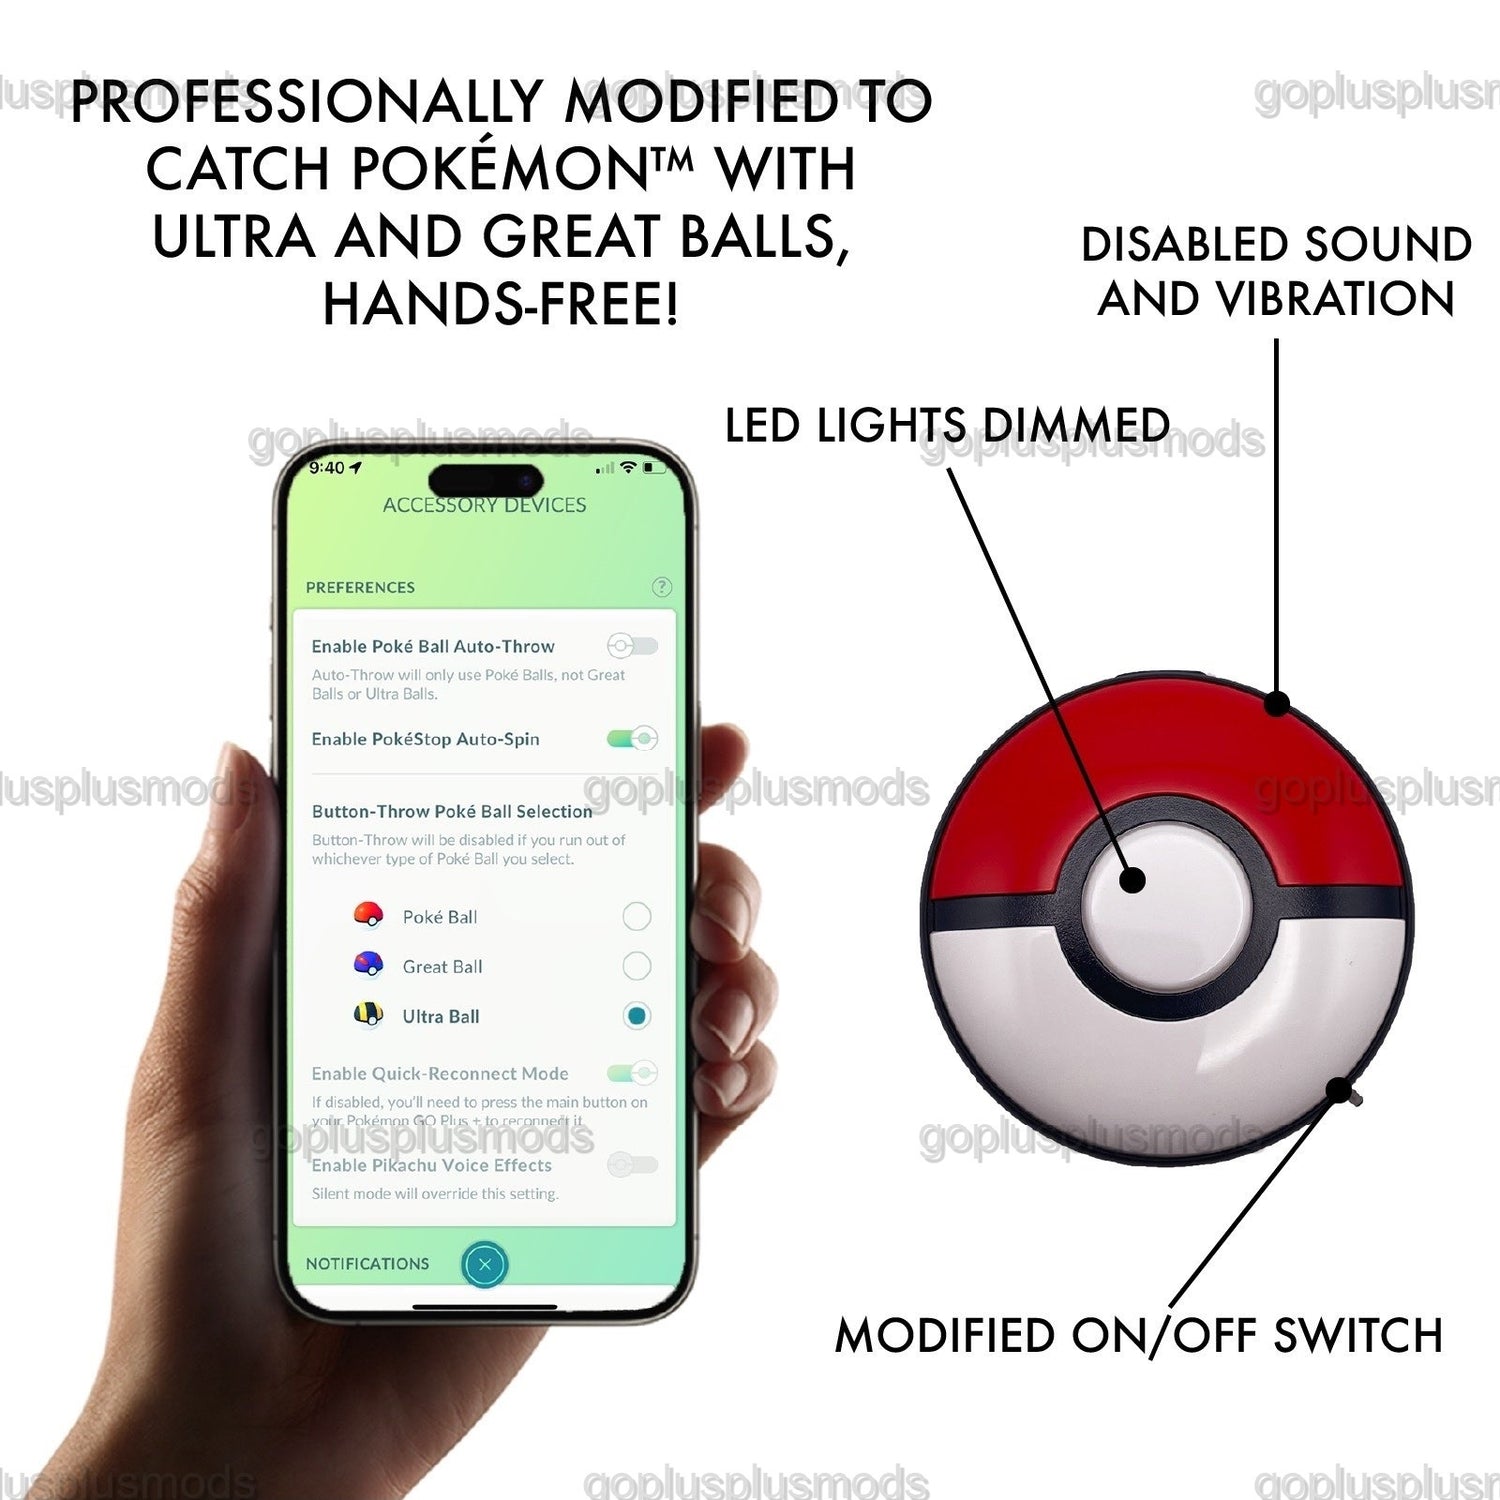 Professionally modified to catch Pokémon with Ultra and Great Balls, hands-free! Disabled sound and vibration, LED lights dimmed, modified on/off switch